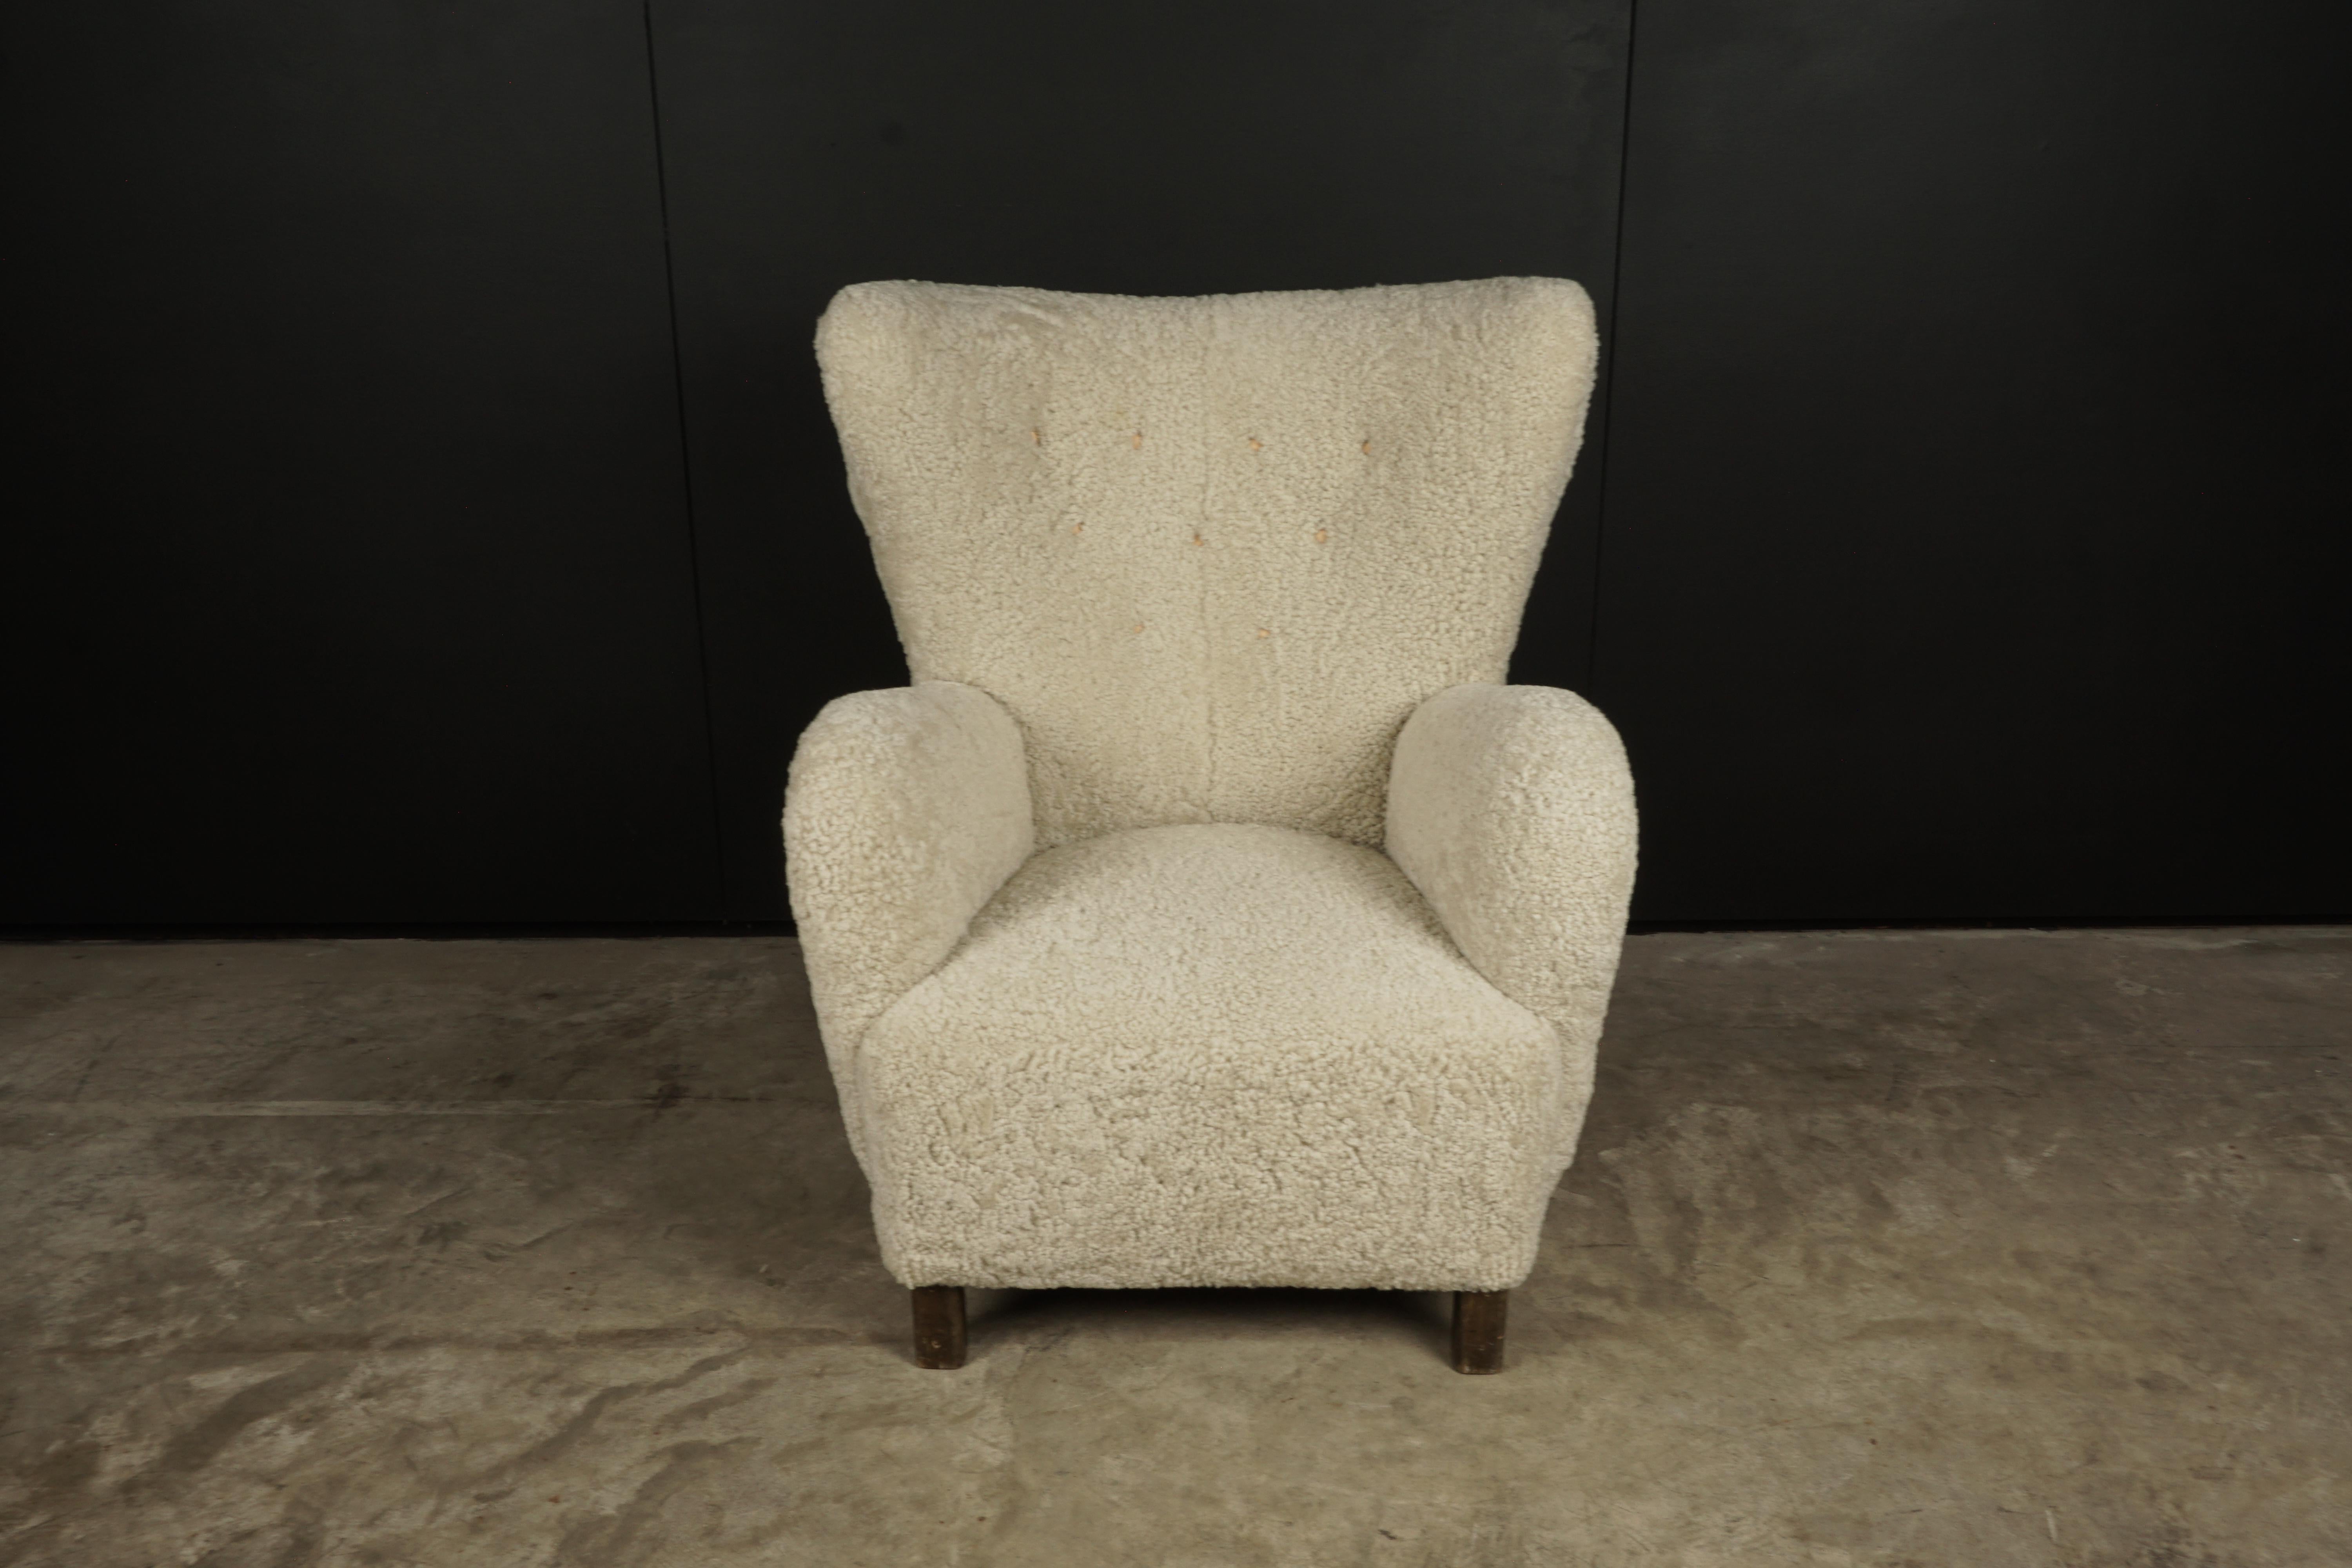 Vintage sheepskin cabinetmaker chair from Denmark, 1940s. Cabinetmaker designed with very soft off-white sheepskin upholstery and leather buttons. Professionally reupholstered in Denmark. Excellent condition.